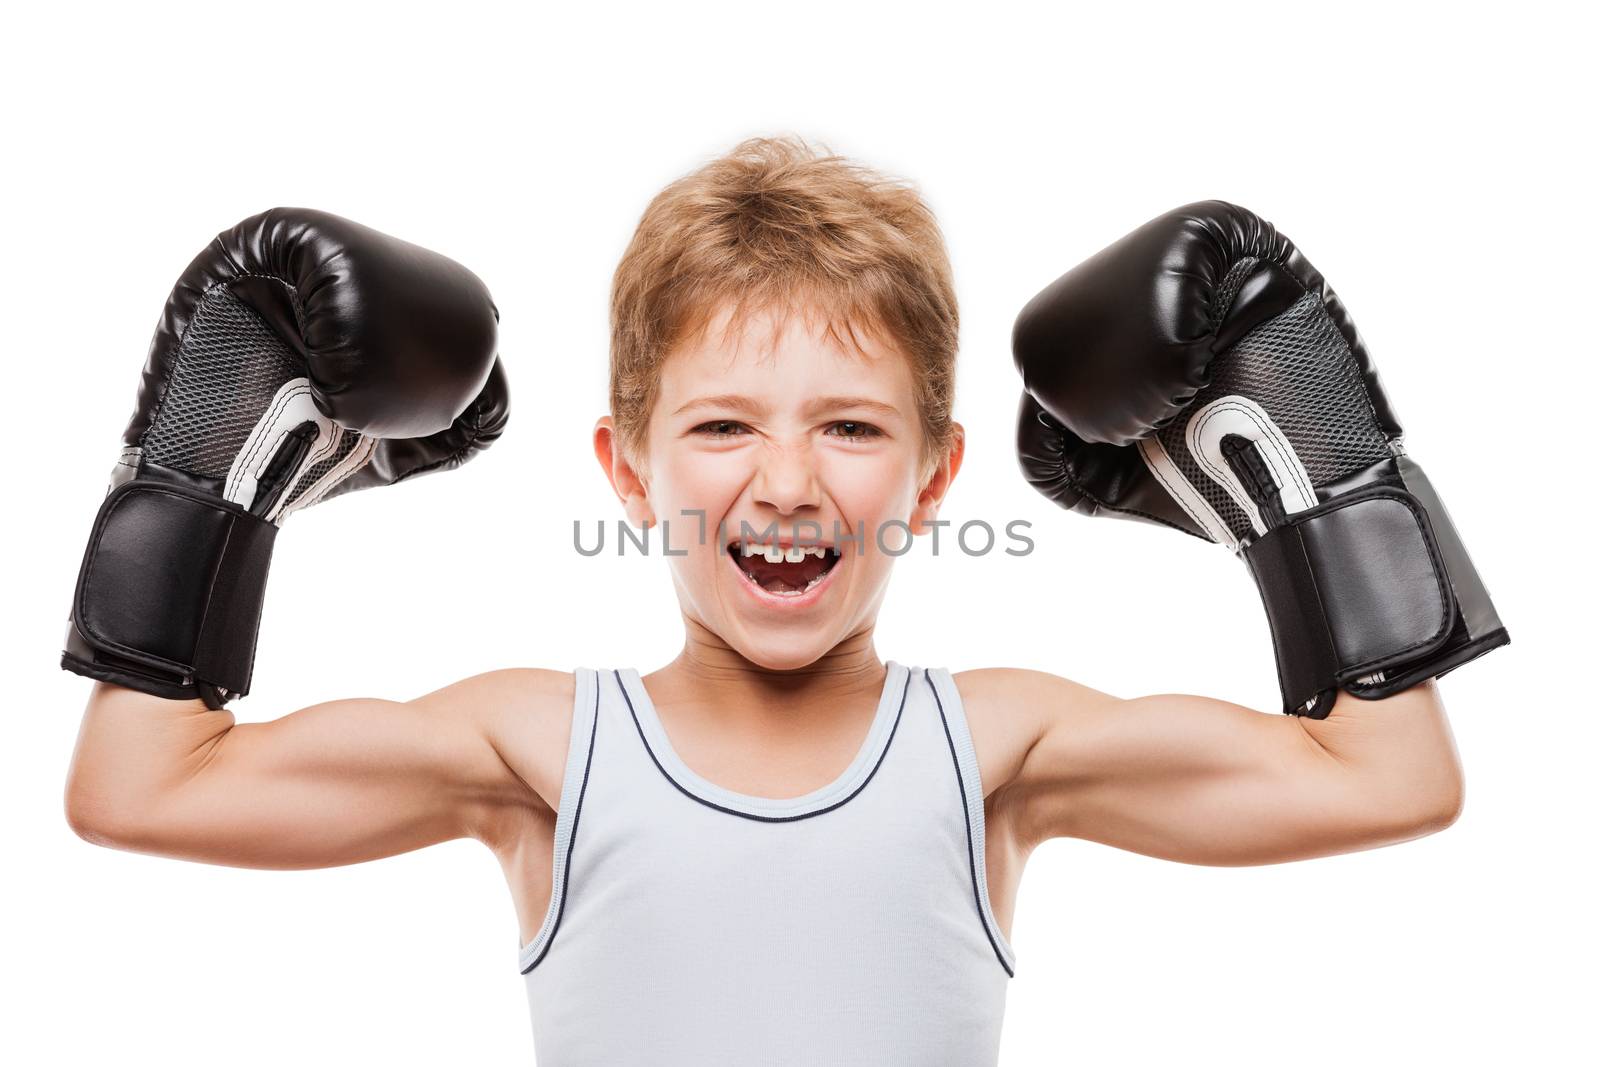 Martial art sport success and win concept - smiling boxing champion child boy gesturing for first place victory triumph